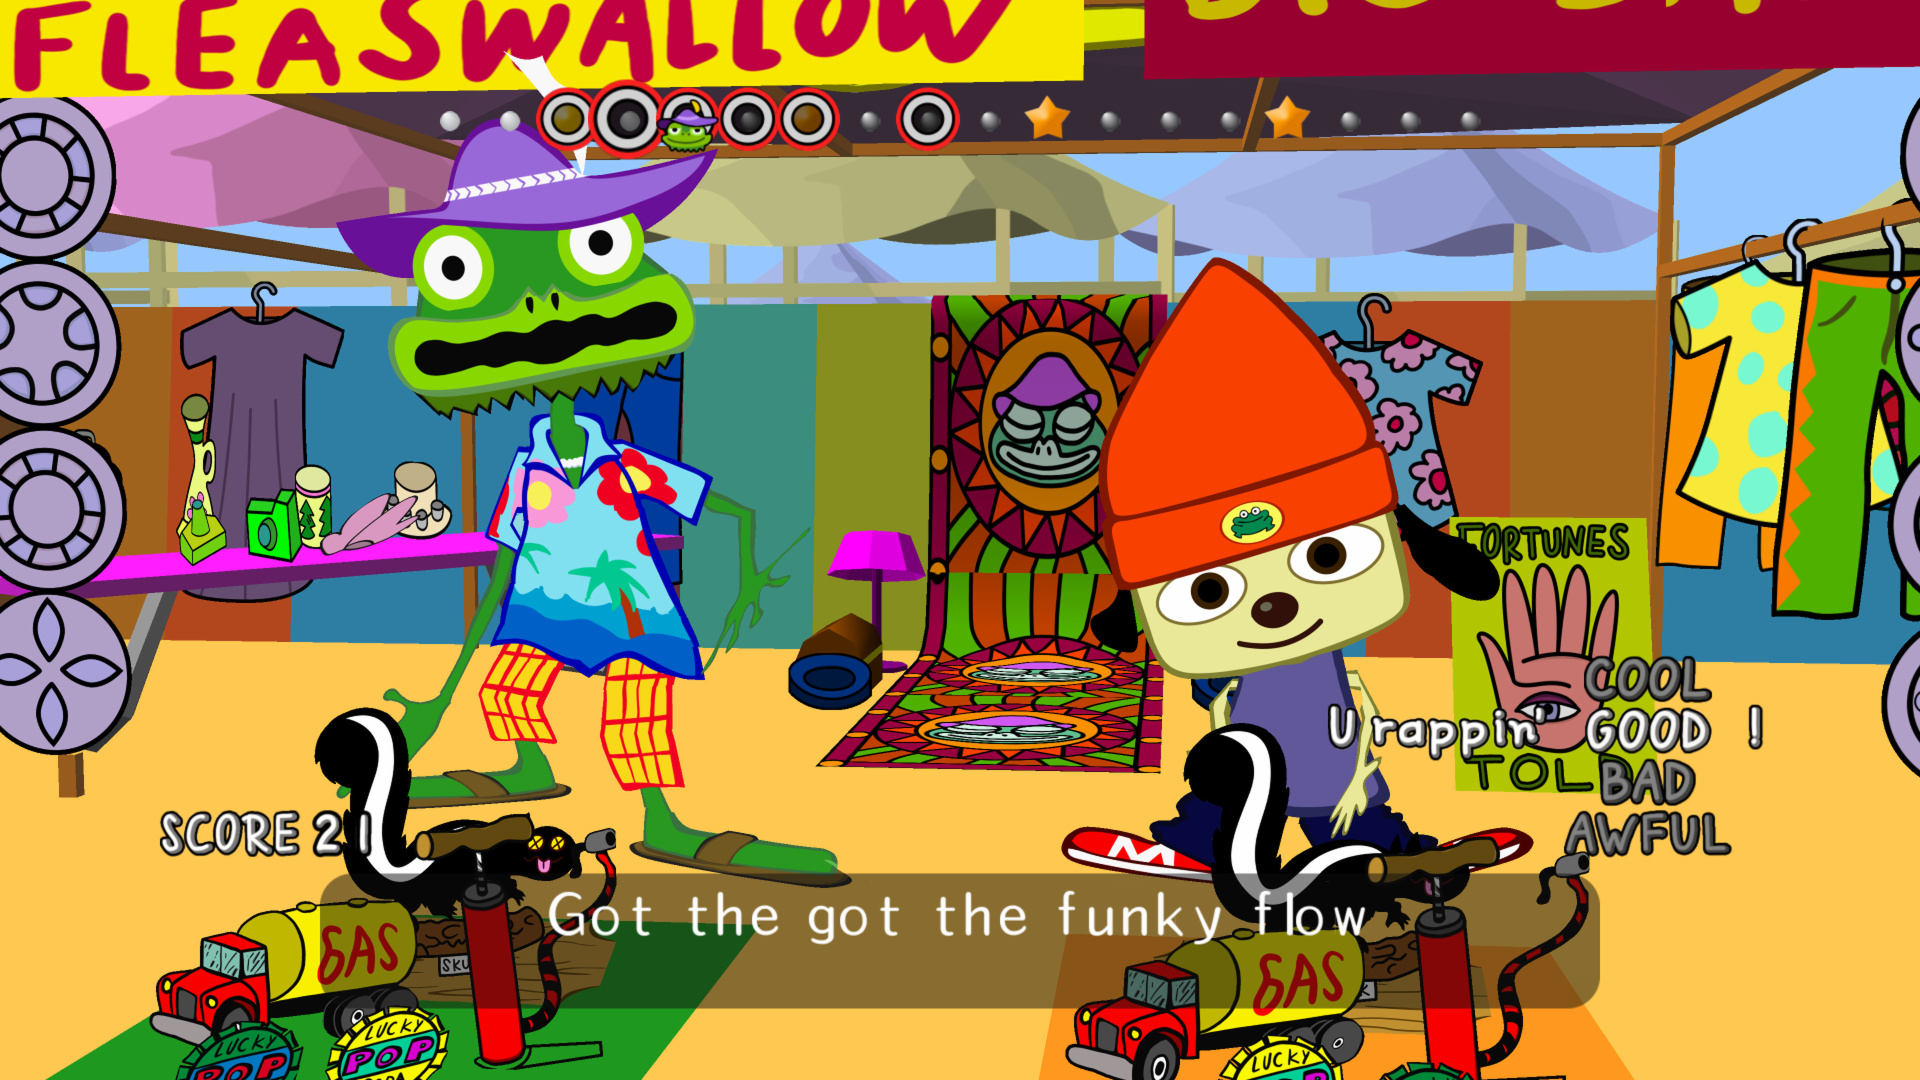  Parappa the Rapper : Video Games